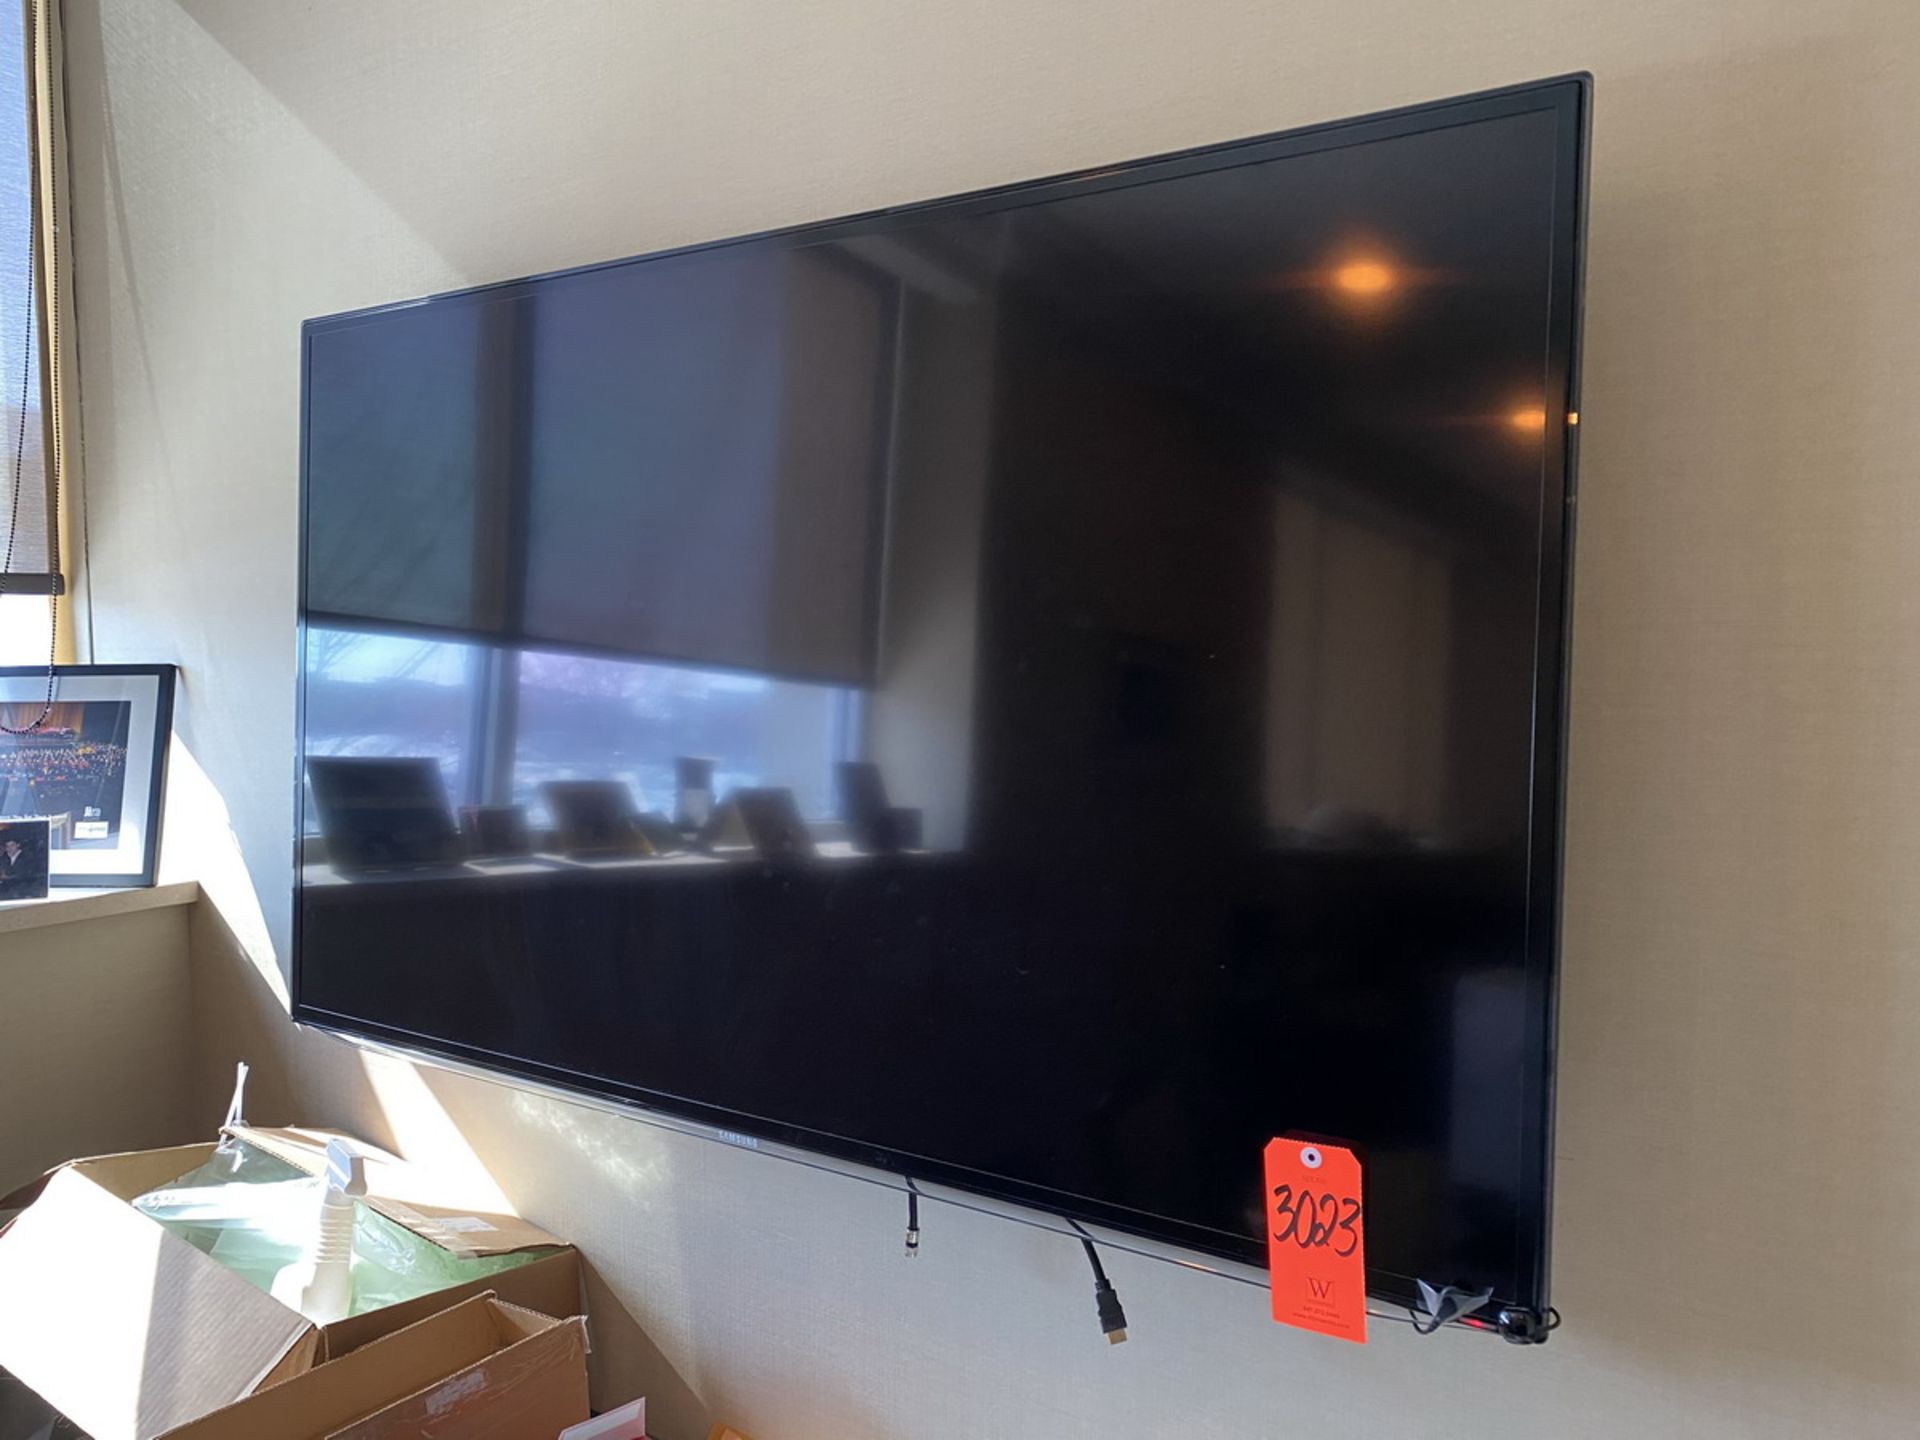 Samsung 60 in. Flatscreen TV (Delayed Removal - Cannot Begin Removal Until 4/23/2021) - (Located In: